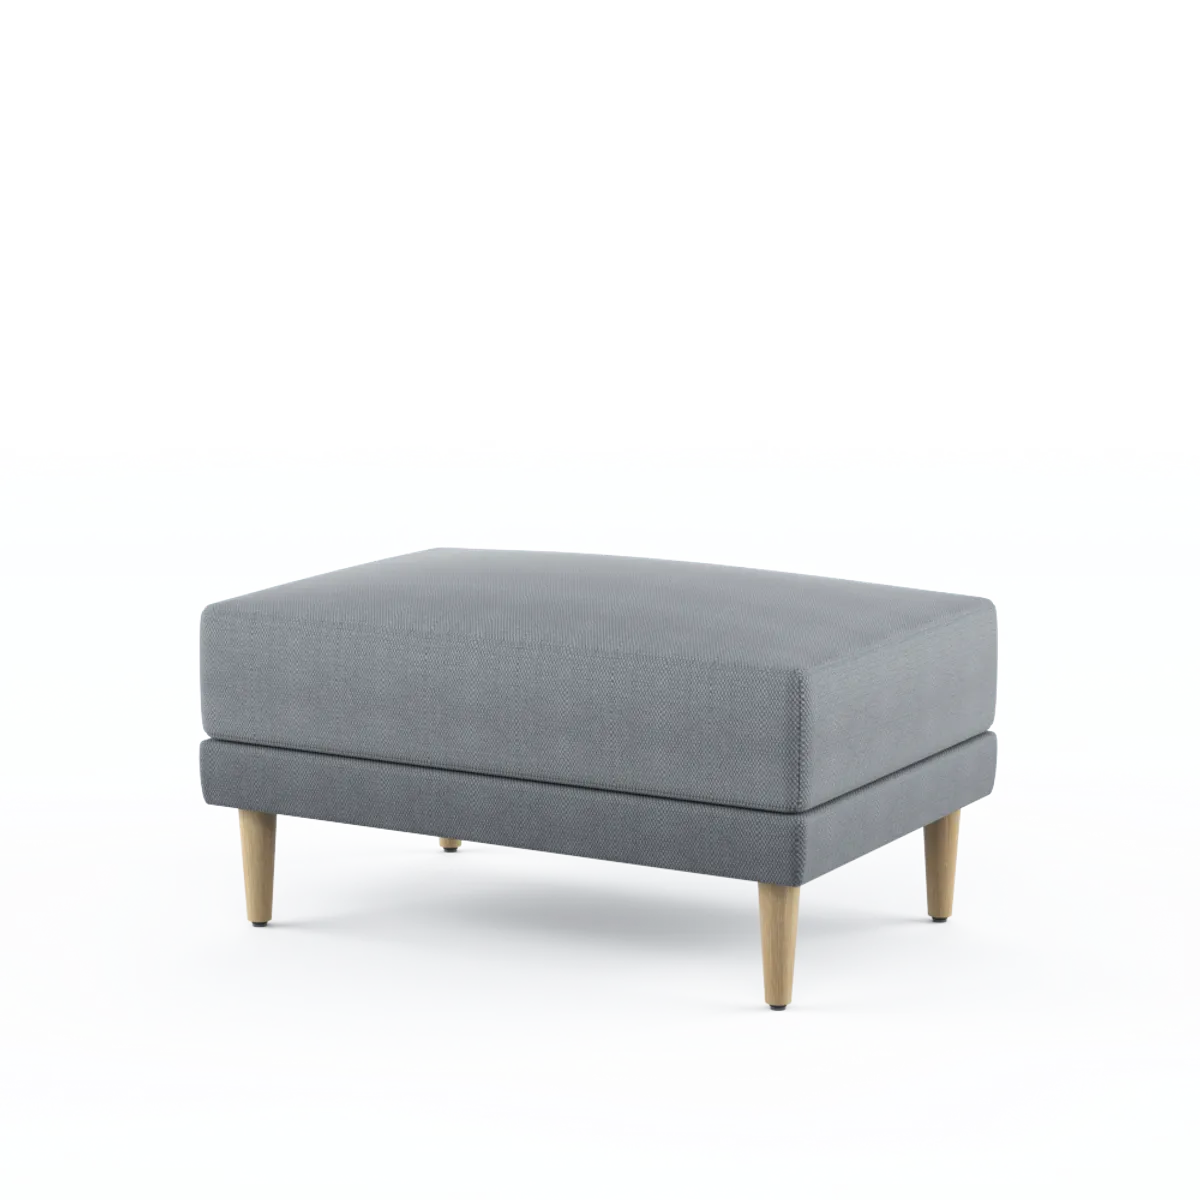 Bespoke Pollen Ottoman Inside Out Contracts 2501